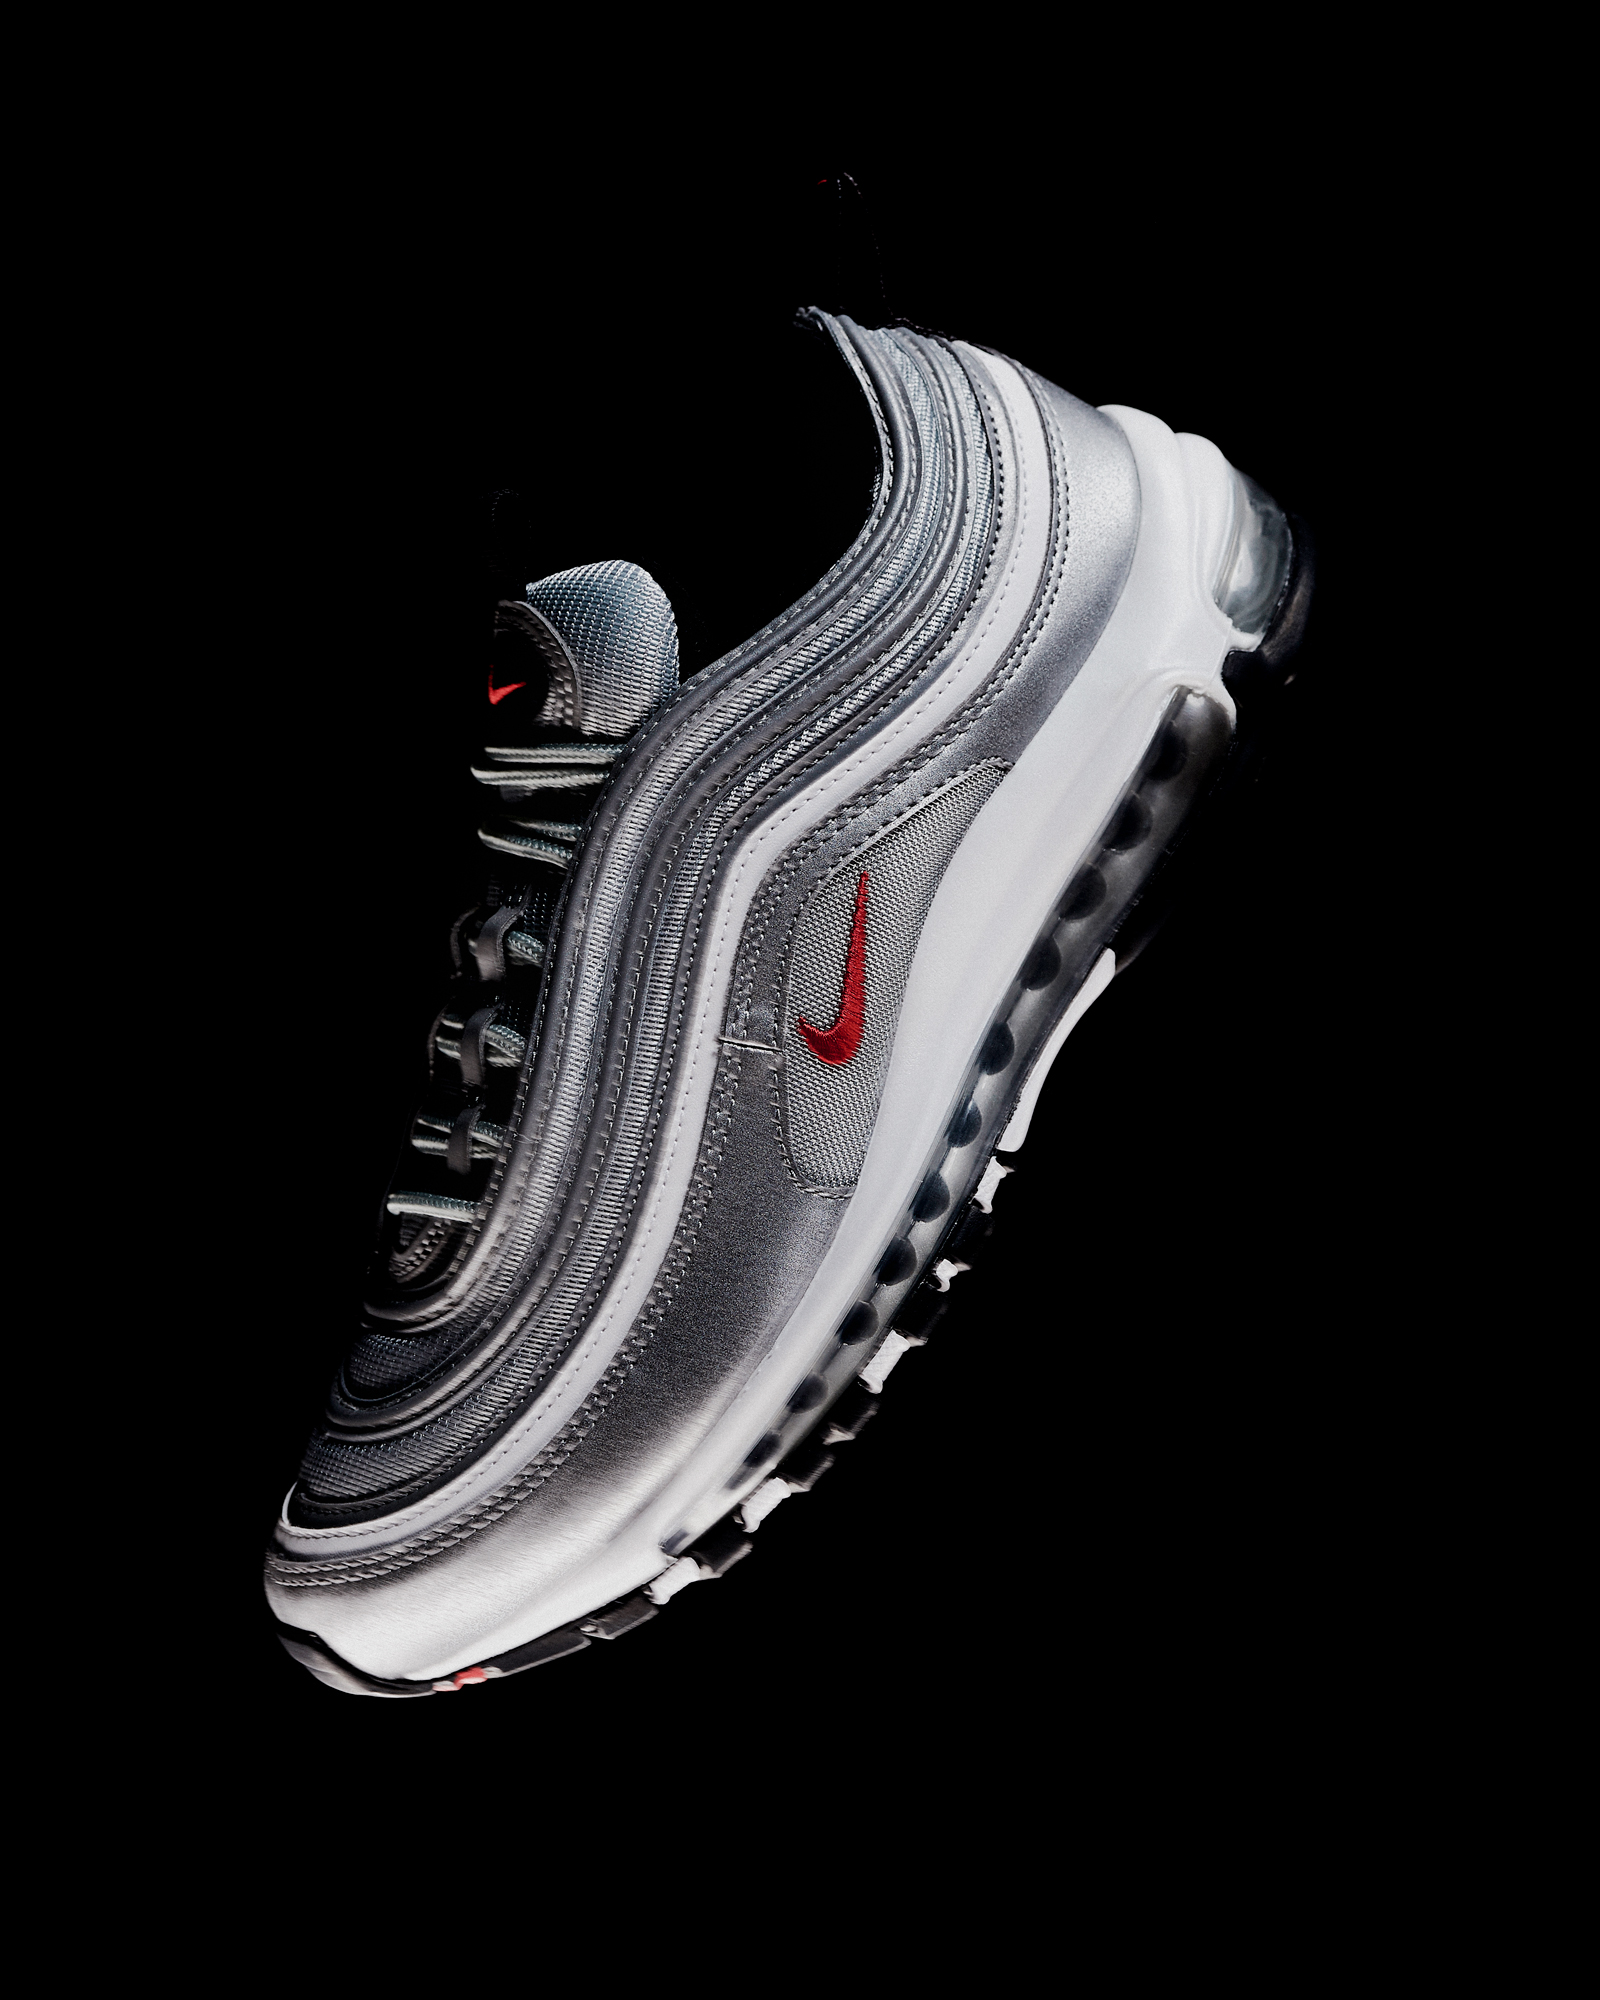 eso es todo auge Usual The return of Nike Air Max 97 OG "Silver" aka "Silver Bullet" 